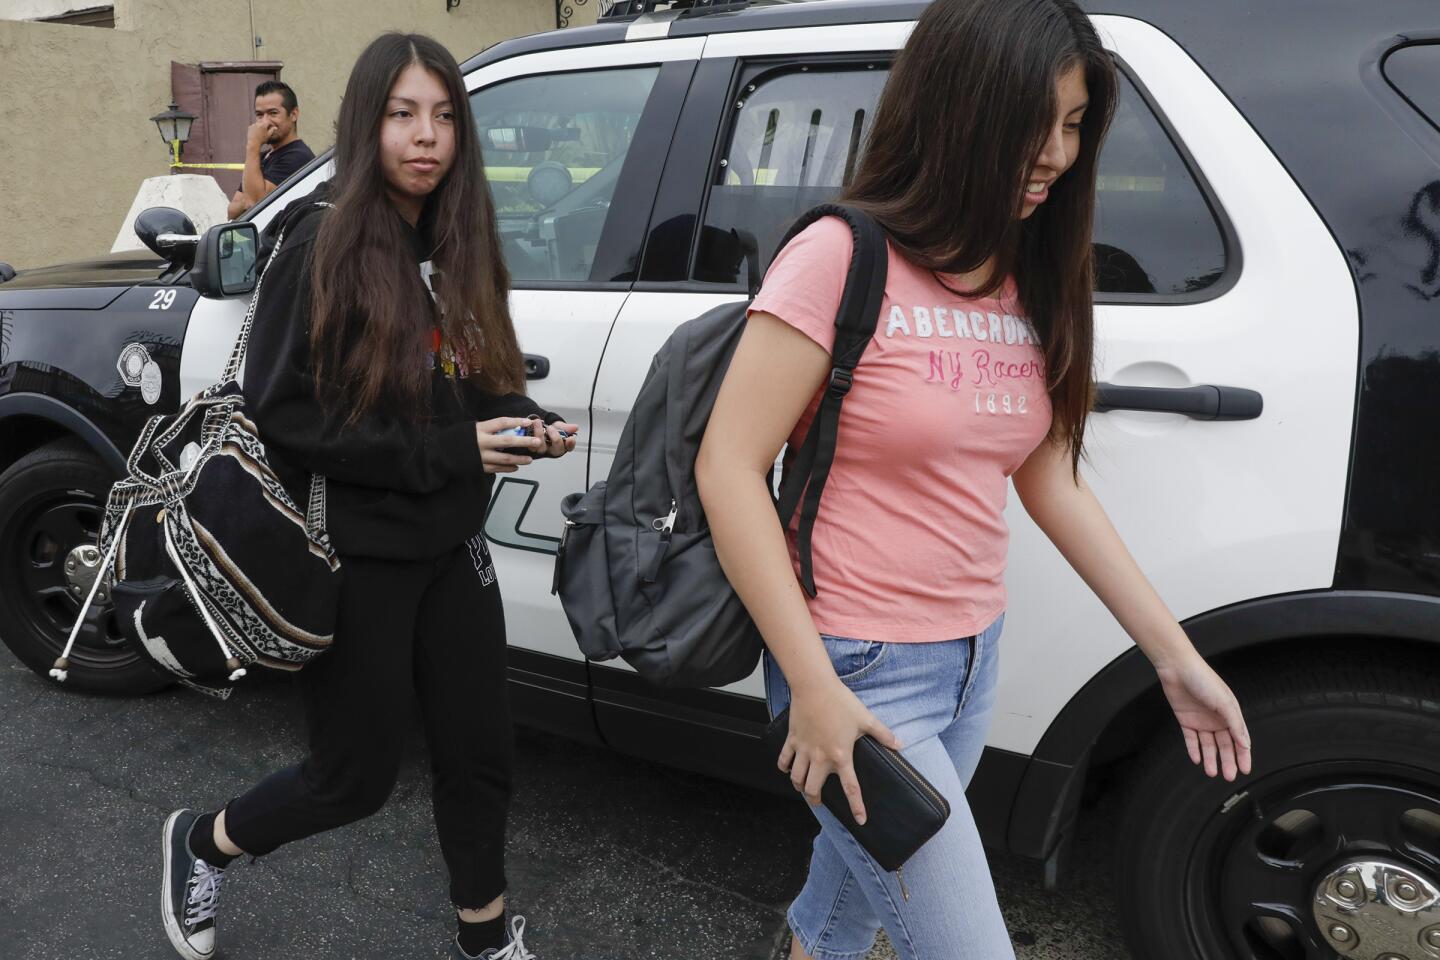 Twin sisters, reportedly the daughters of a woman who was stabbed at a business in Garden Grove on Wednesday, leave the Casa De Portola apartment complex.